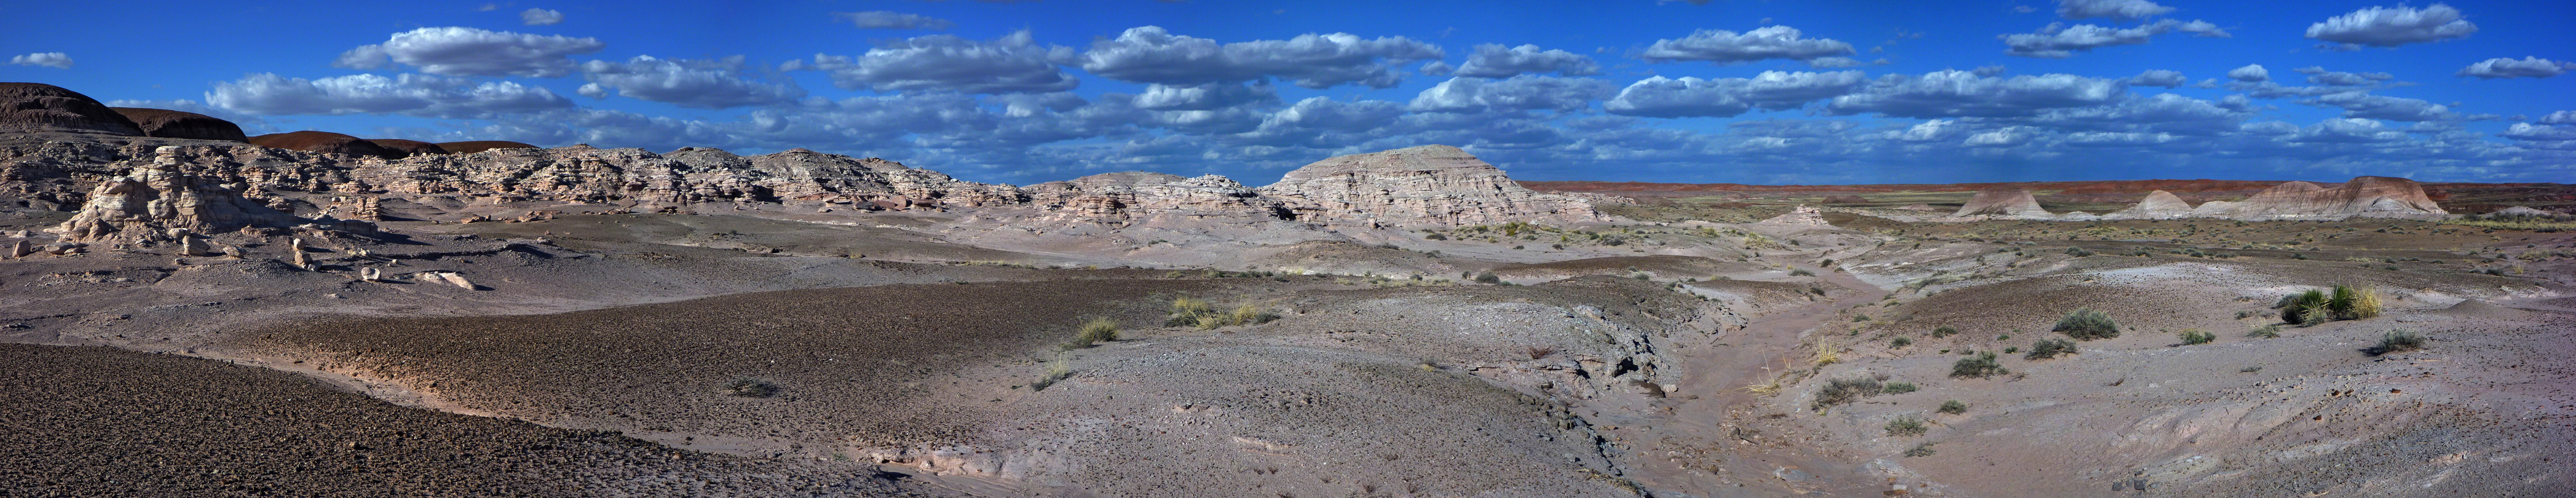 Panorama of badlands and eroded rocks